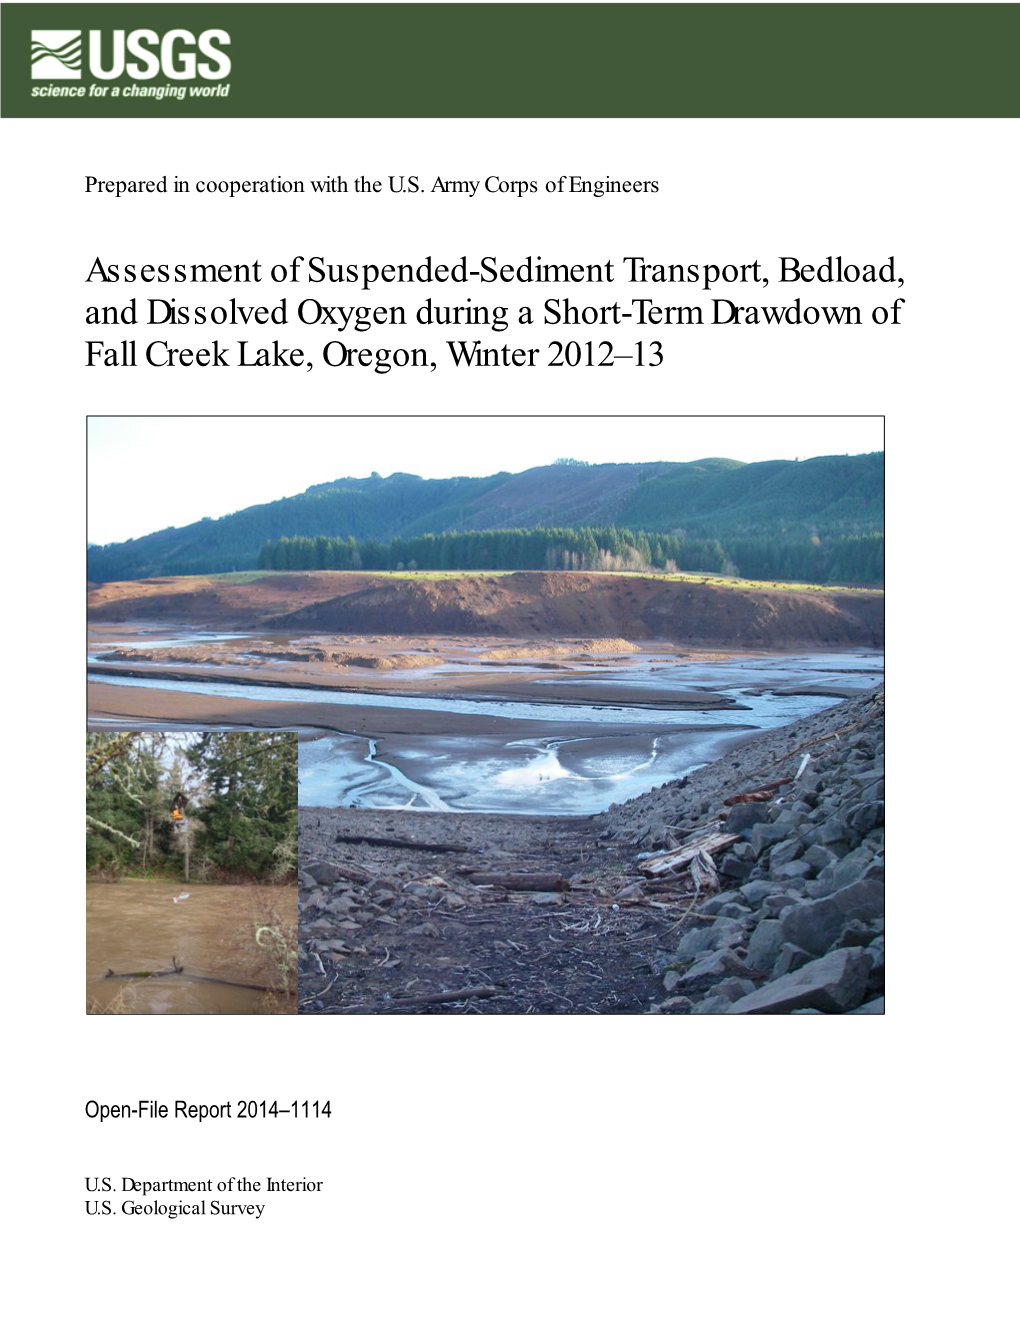 Assessment of Suspended-Sediment Transport, Bedload, and Dissolved Oxygen During a Short-Term Drawdown of Fall Creek Lake, Oregon, Winter 2012–13